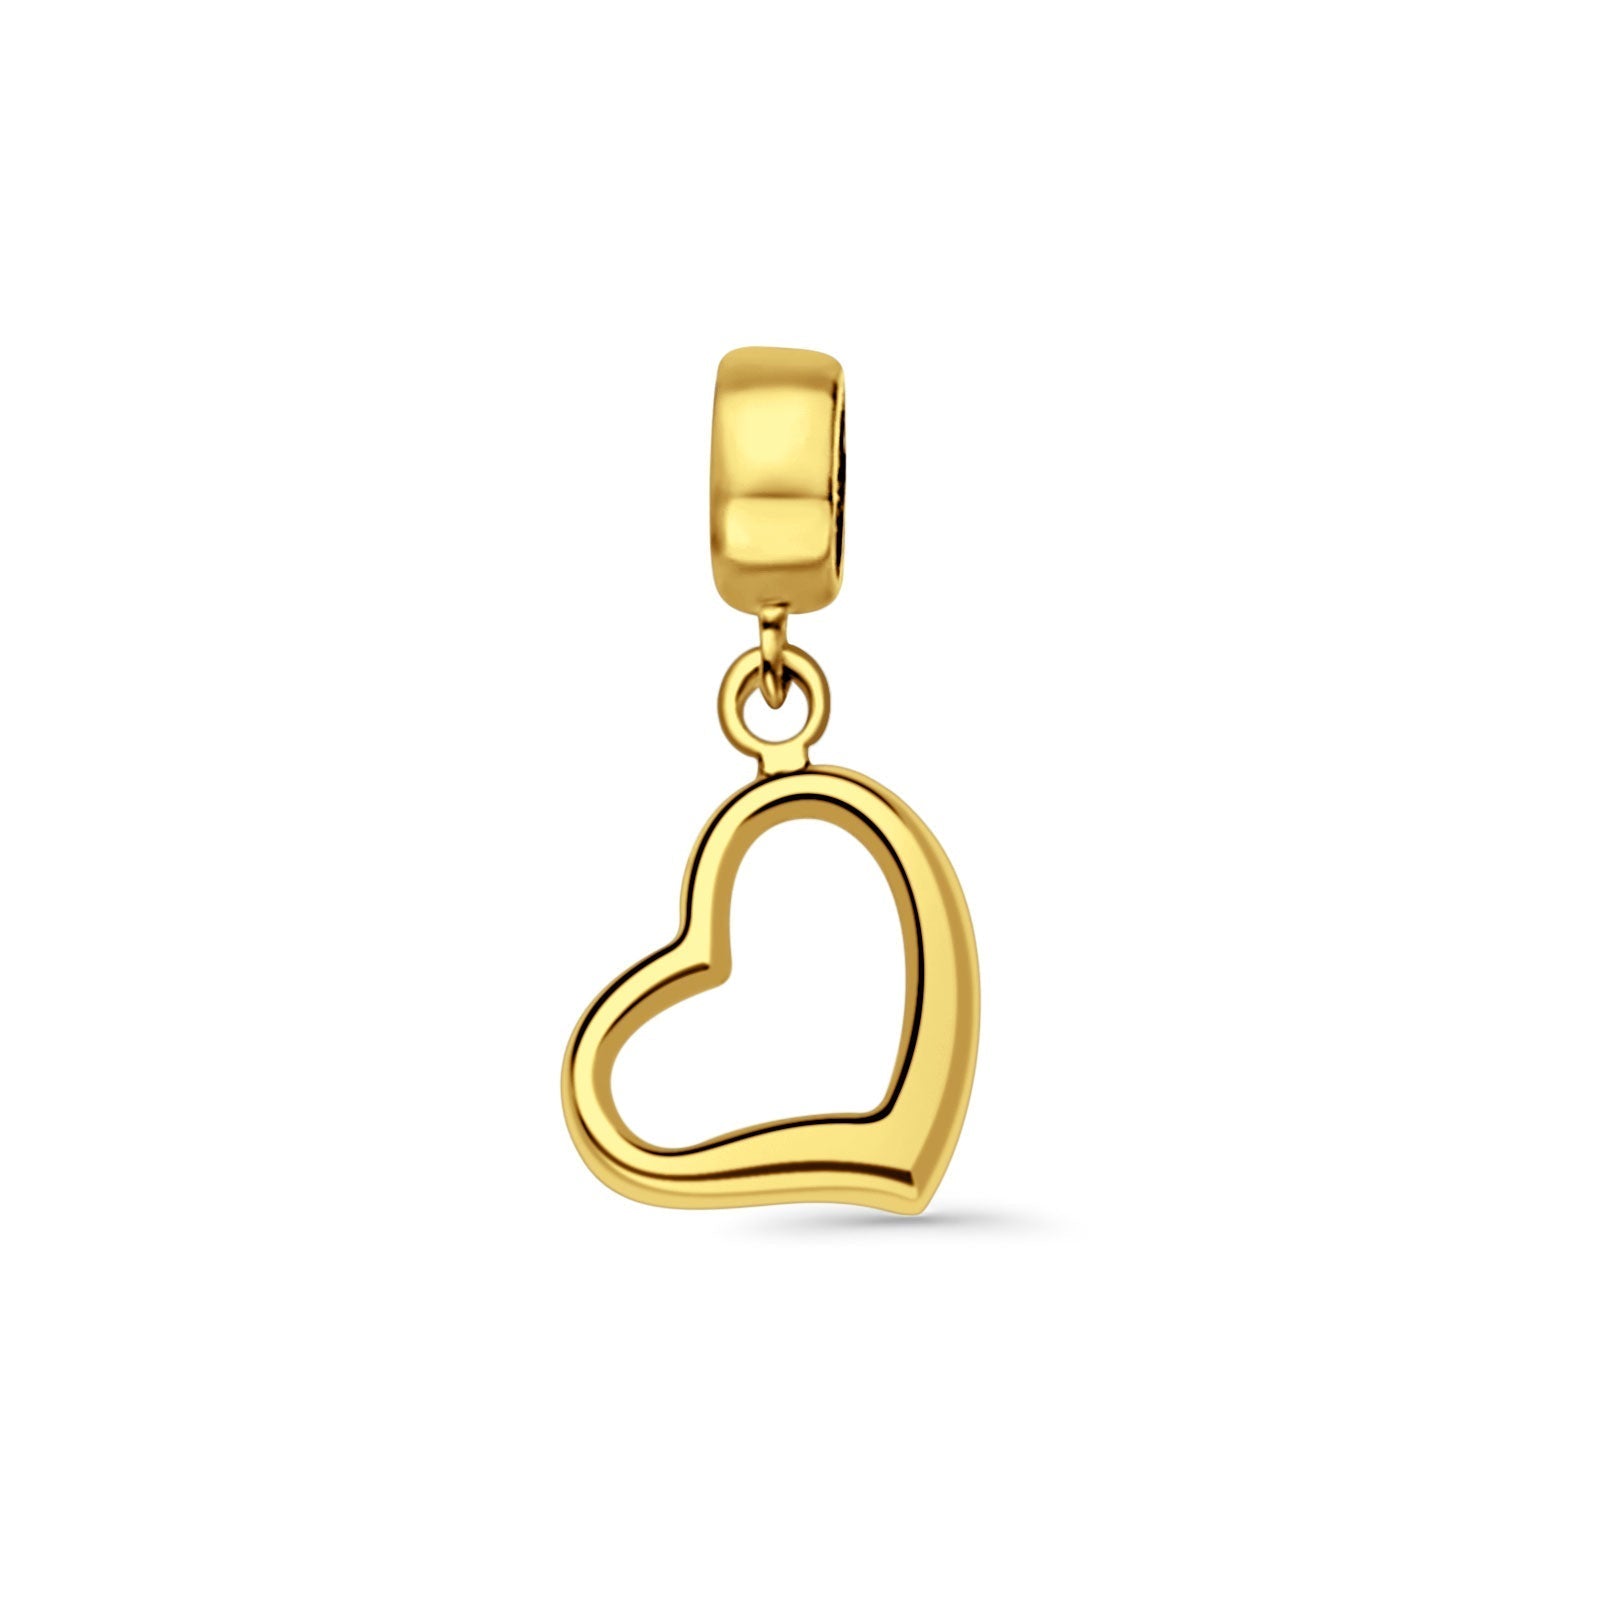 14K Yellow Gold Heart Charm for Mix&Match Pendant 21mmX10mm 0.7 grams